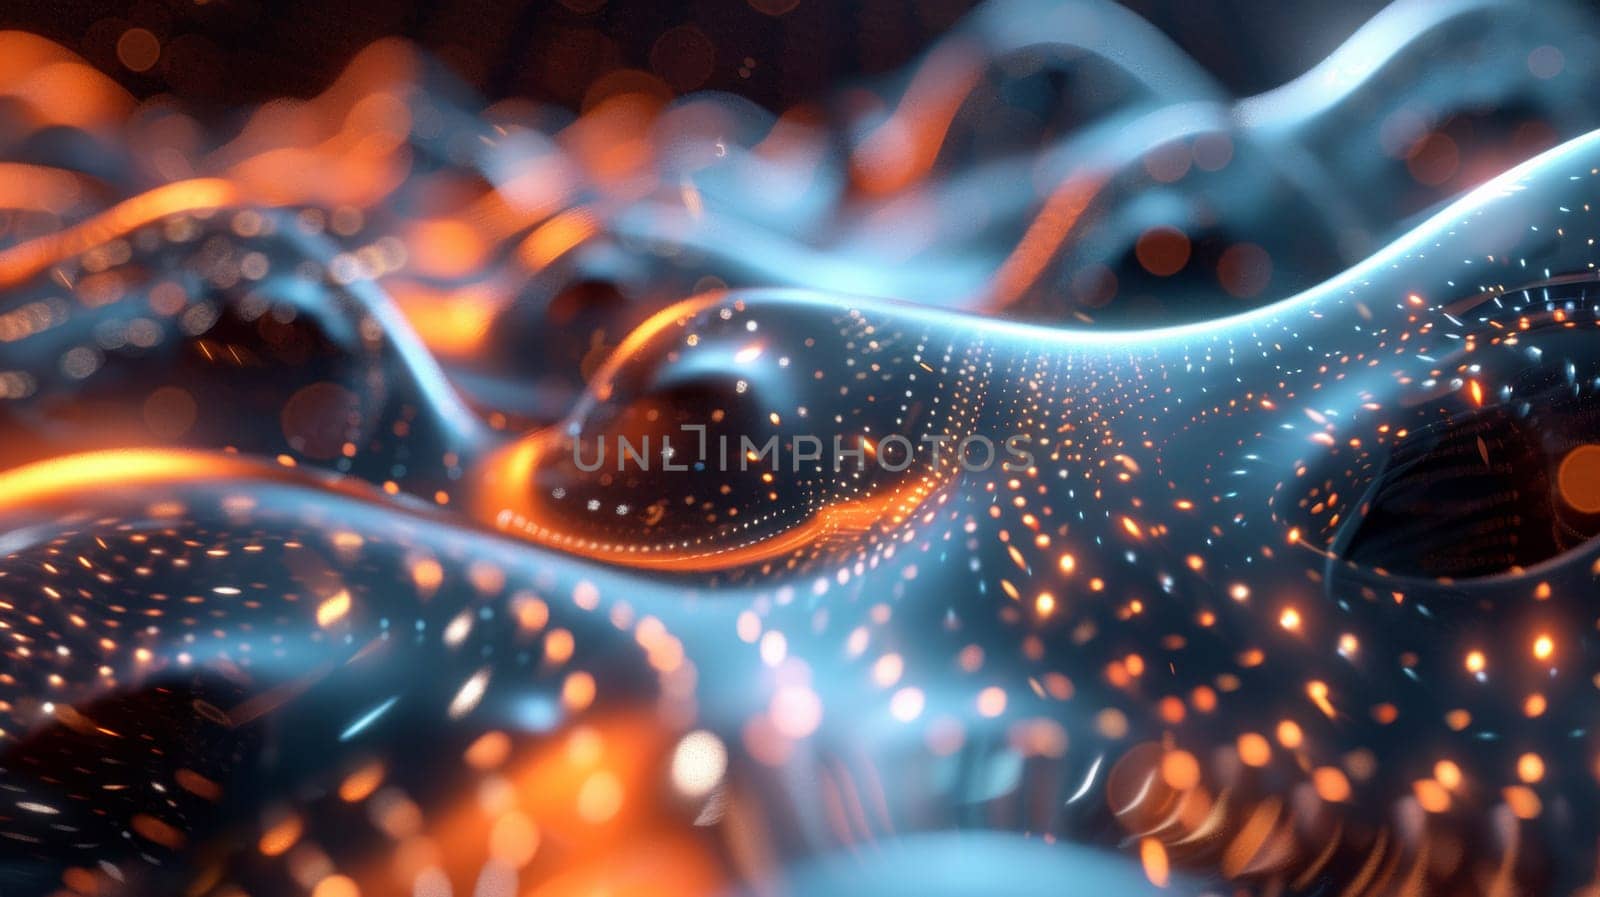 A close up of a digital image that has some glowing lights, AI by starush